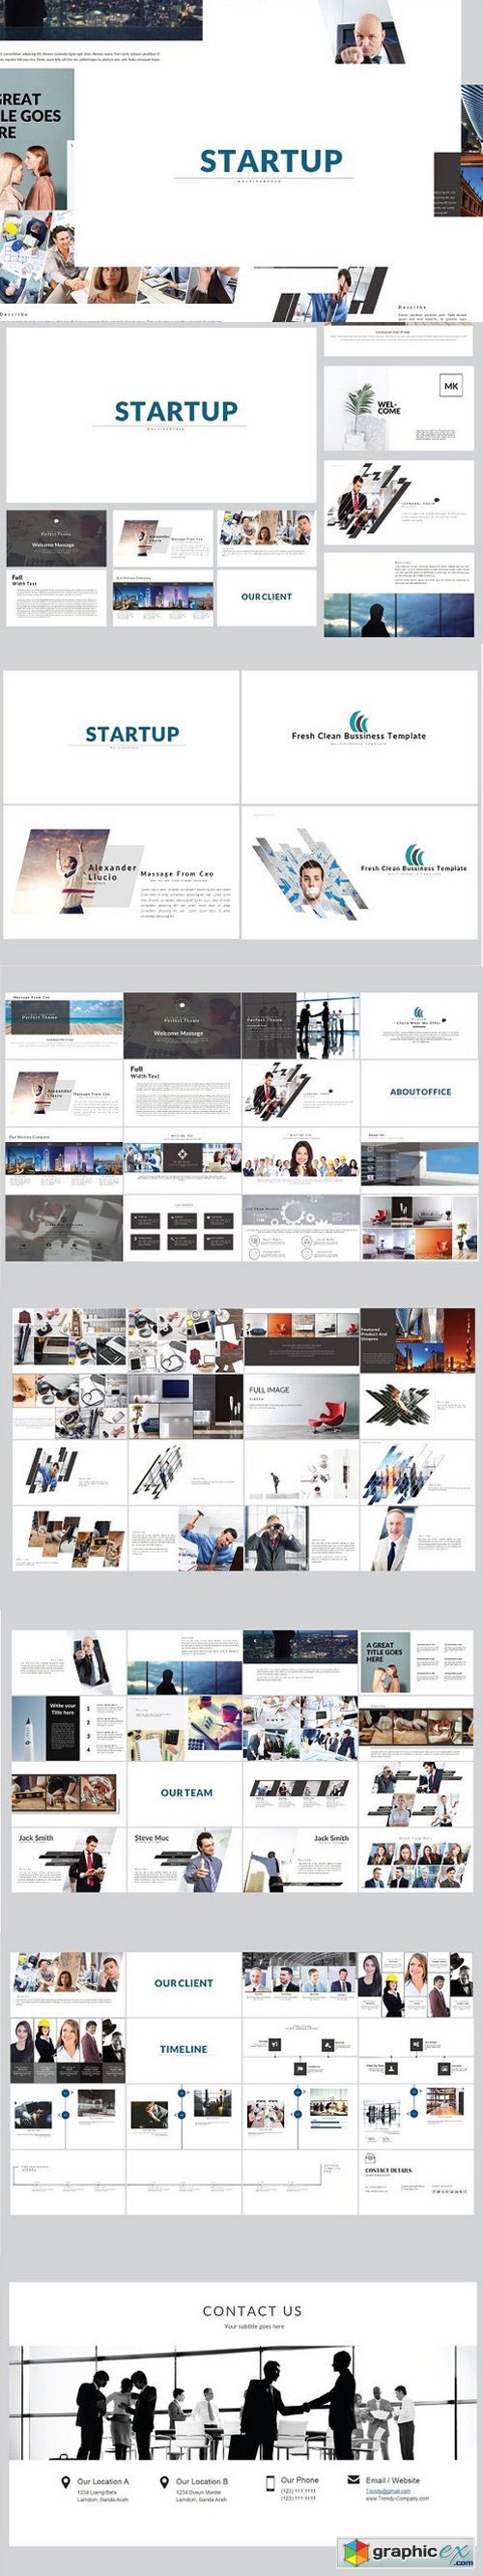 Startup Business Keynote Template 1558820